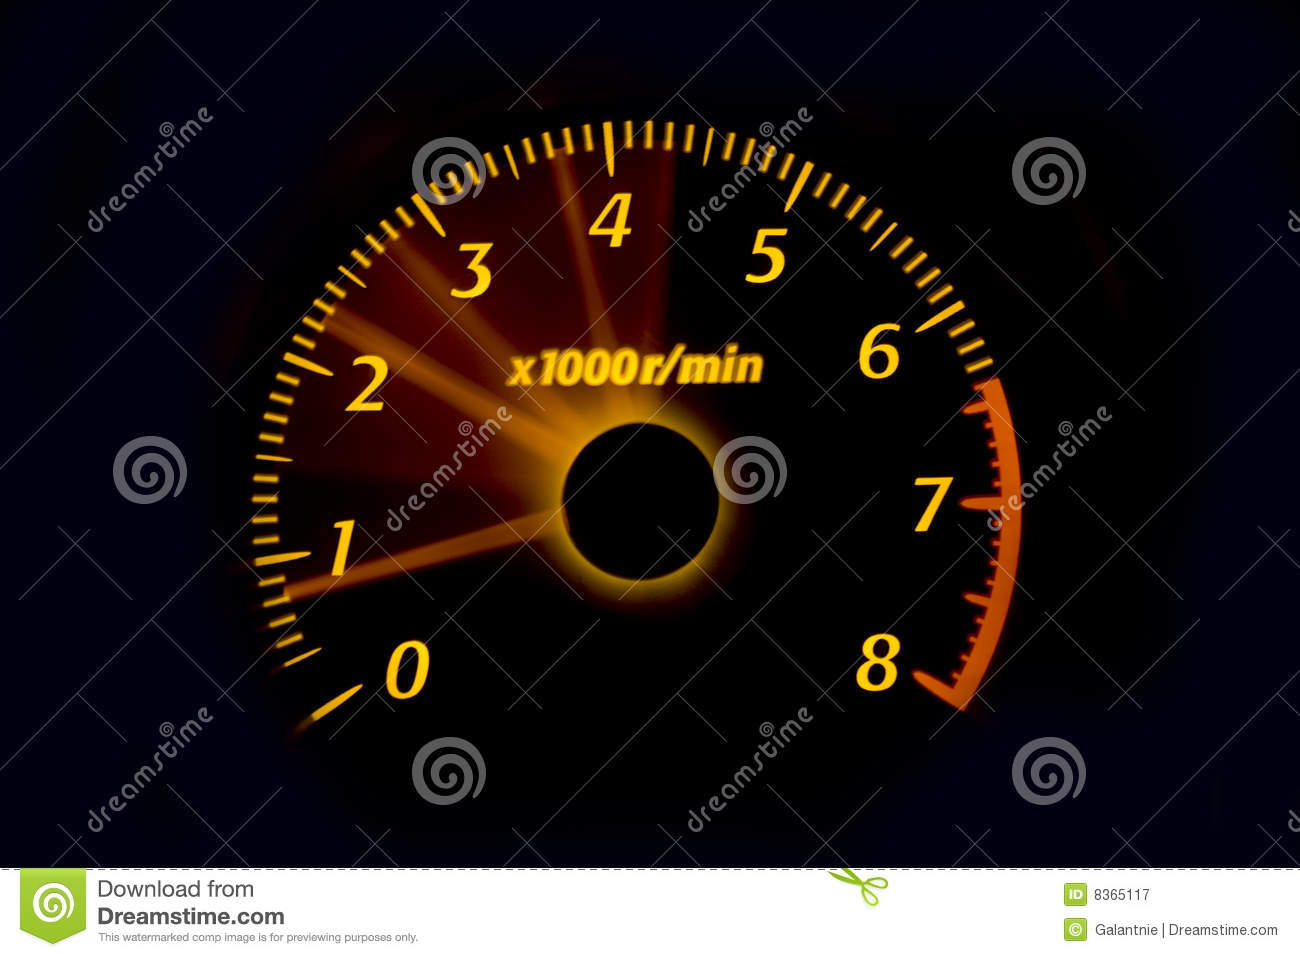 Dashboard Gauges Royalty Free Stock Photography   Image  8365117